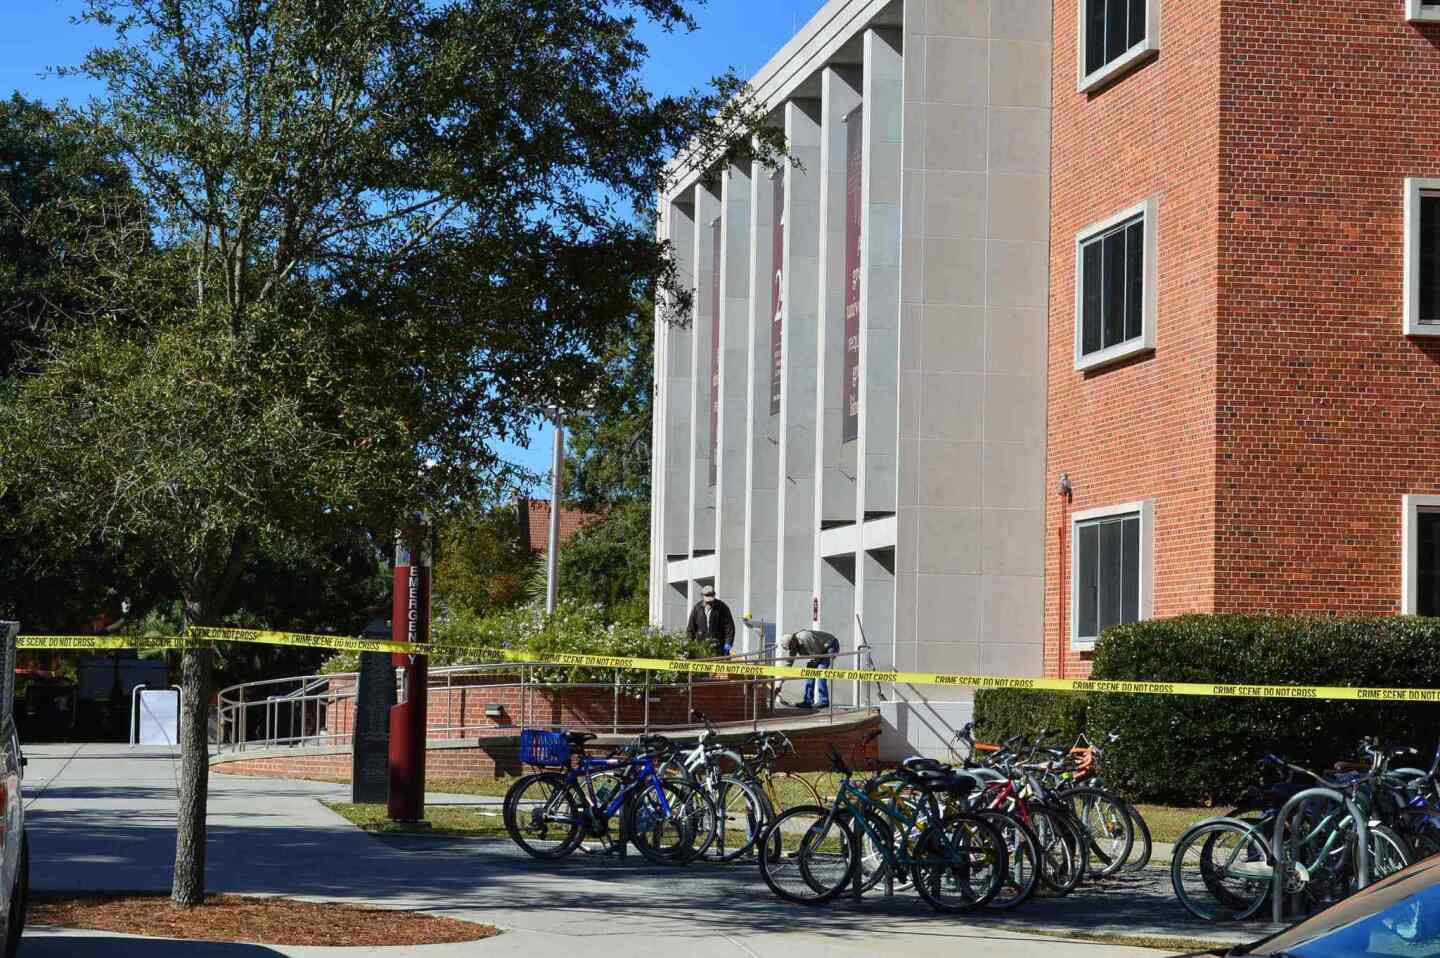 Crime scene tape is seen in front of the library at Florida State University, in Tallahassee, Florida, November 20, 2014. Three students were shot and wounded when a gunman opened fire inside the main Florida State University library early on Thursday, and campus police shot the suspect dead, officials said.